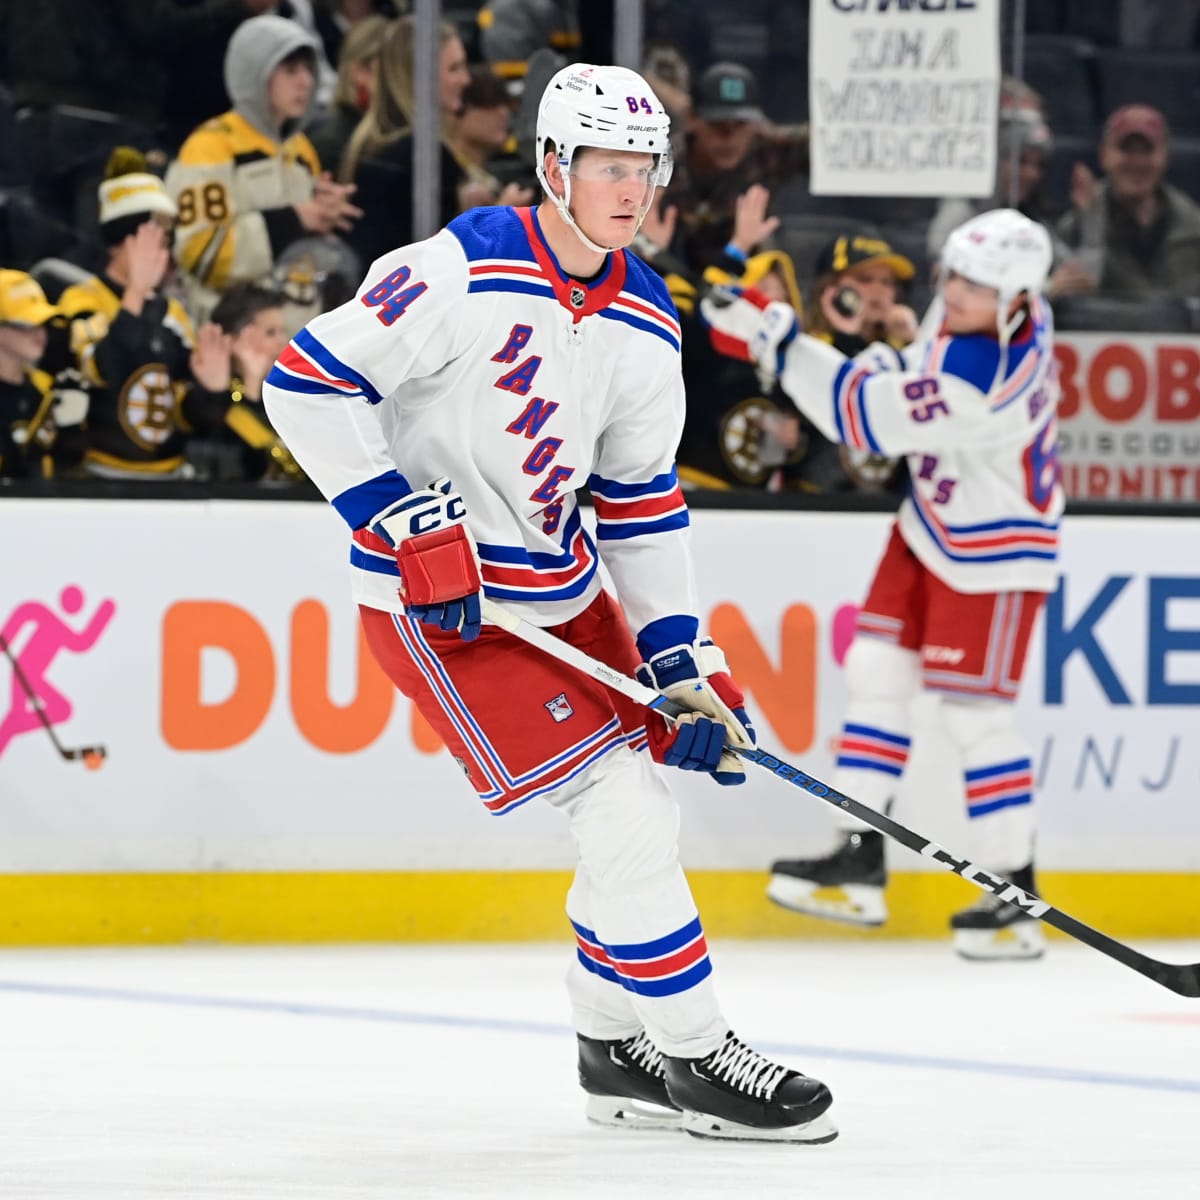 Adam Edstrom A Last Minute Call-Up For Rangers, Scores In ...